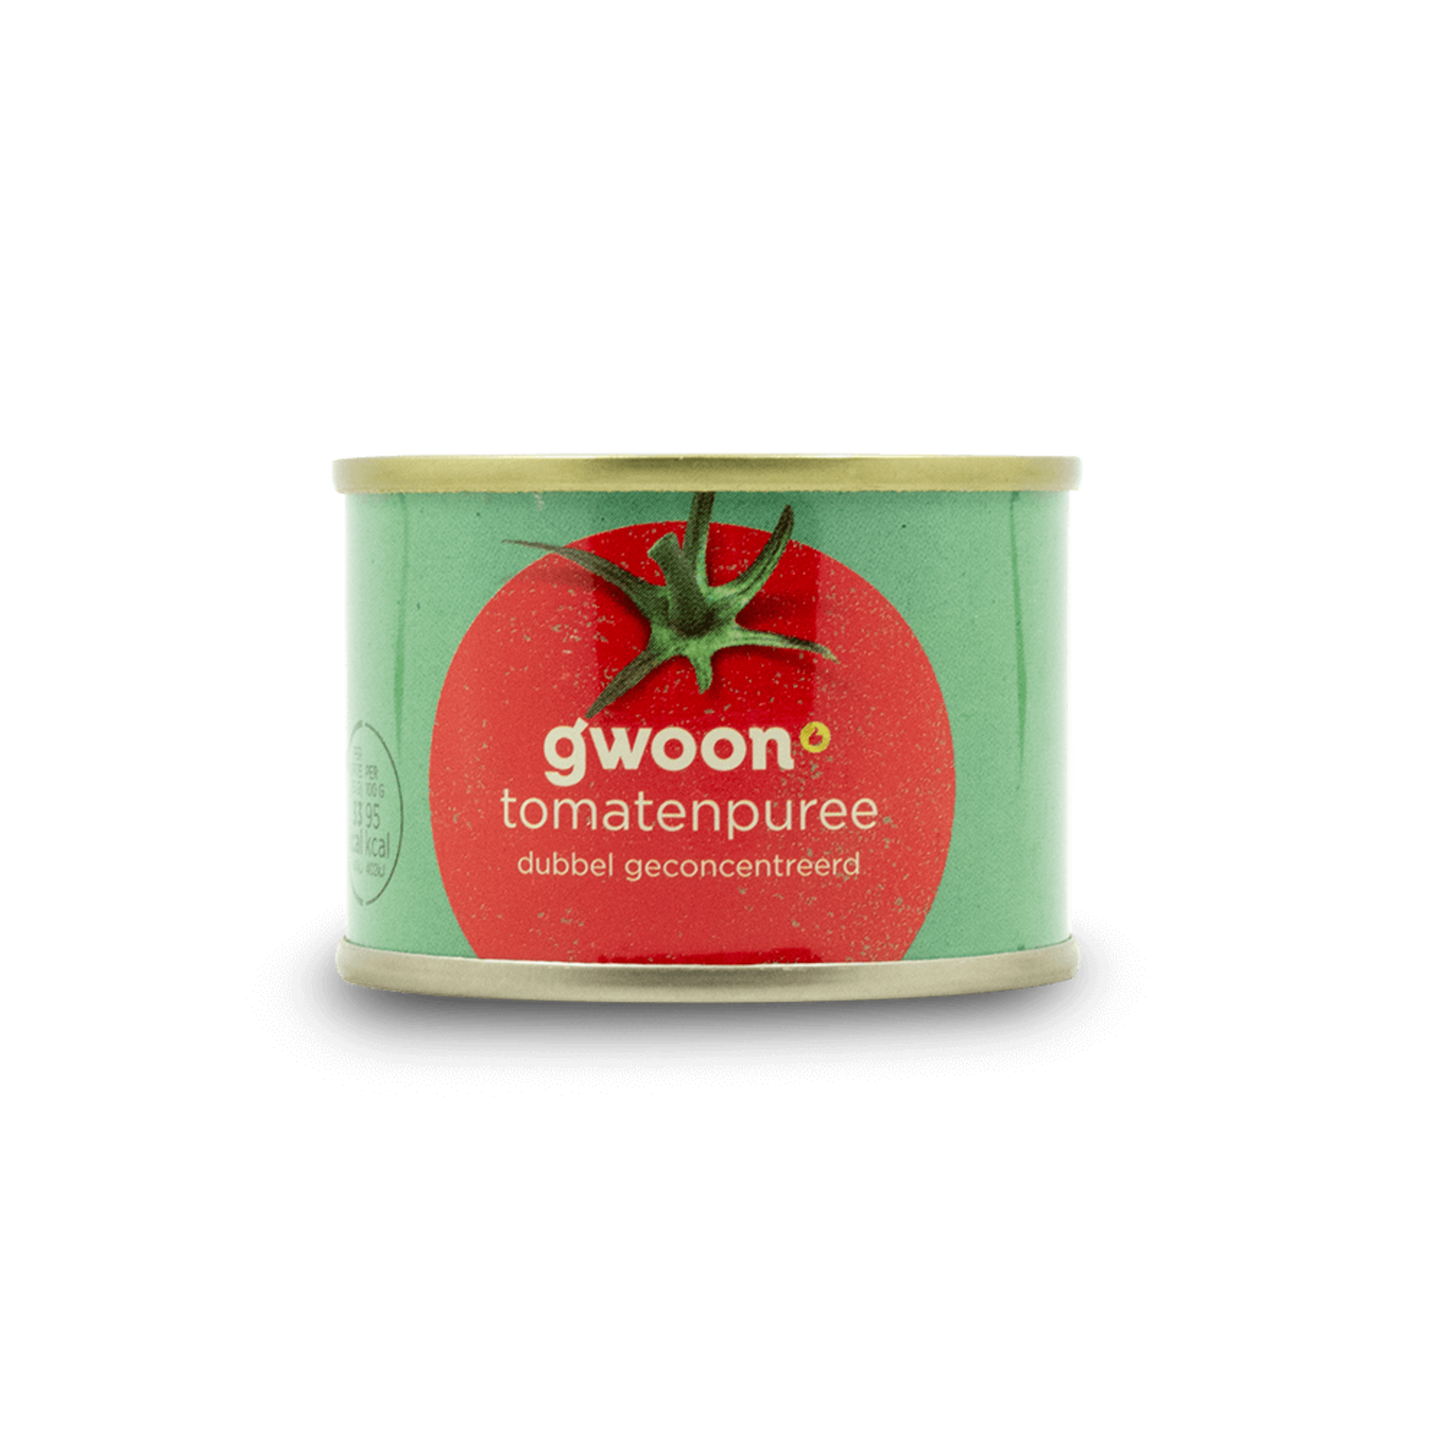 G'WOON Double Concentrated Tomato Paste